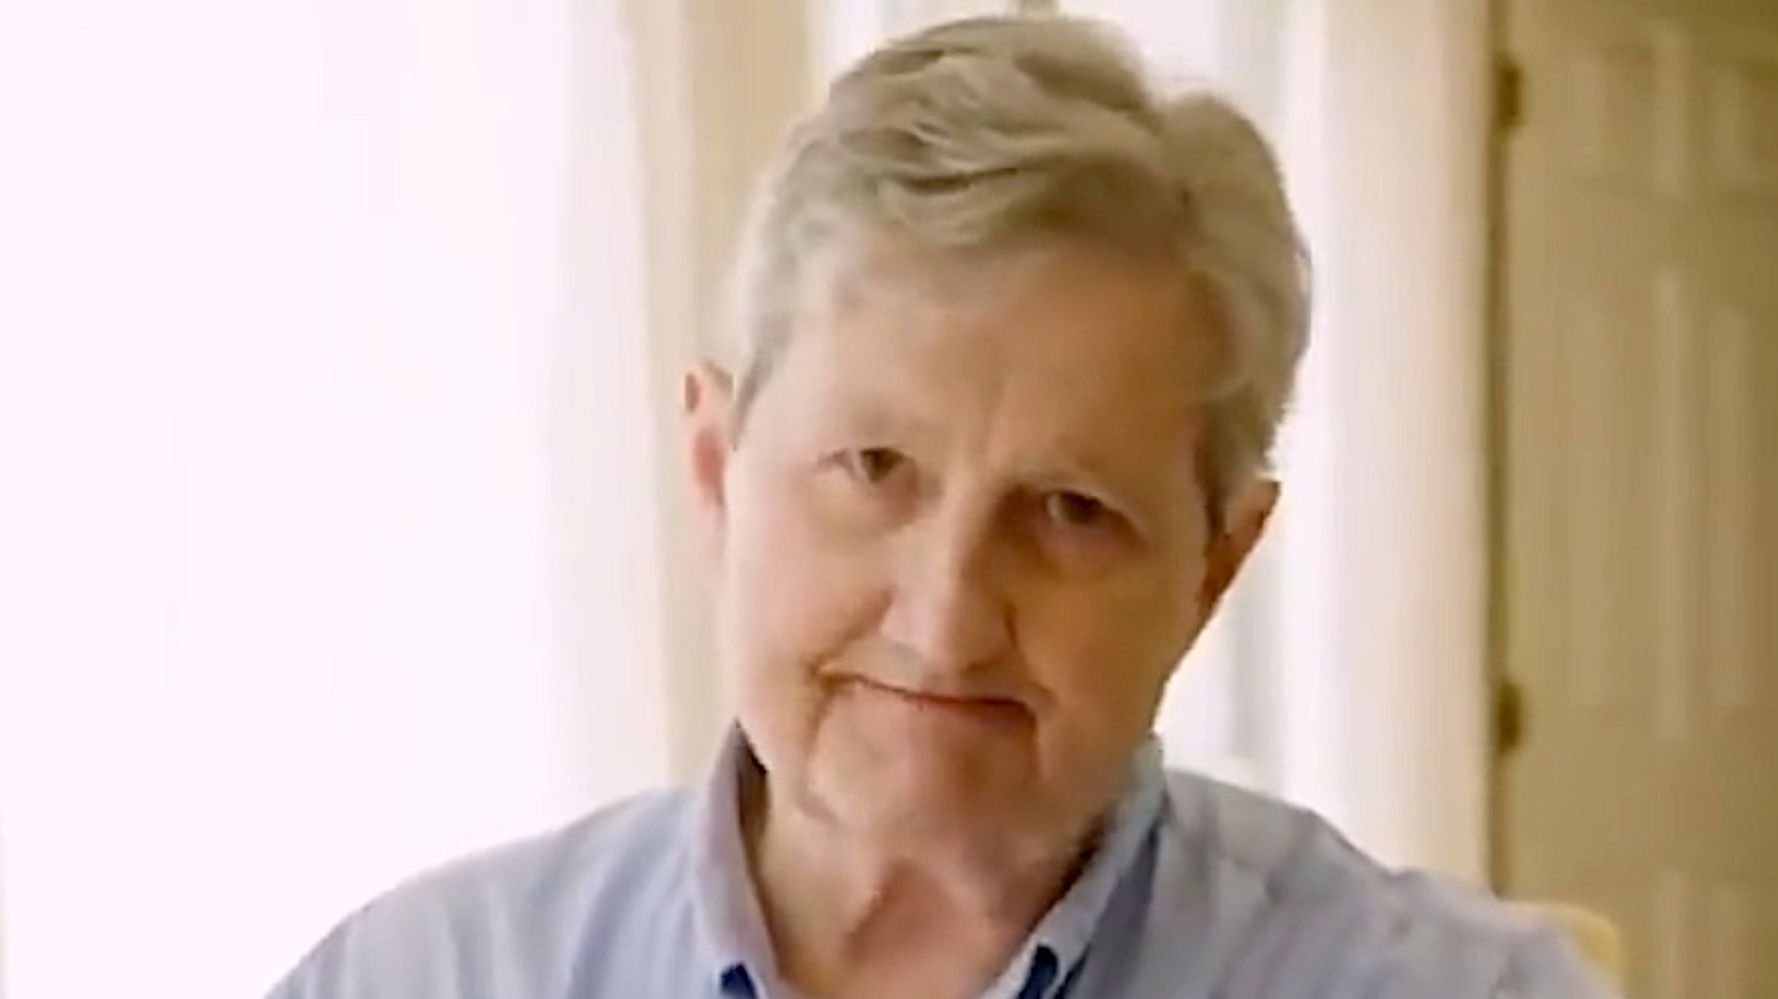 NRA’s Attempt To ‘Trigger The Libs’ With Sen. John Kennedy Backfires Hilariously